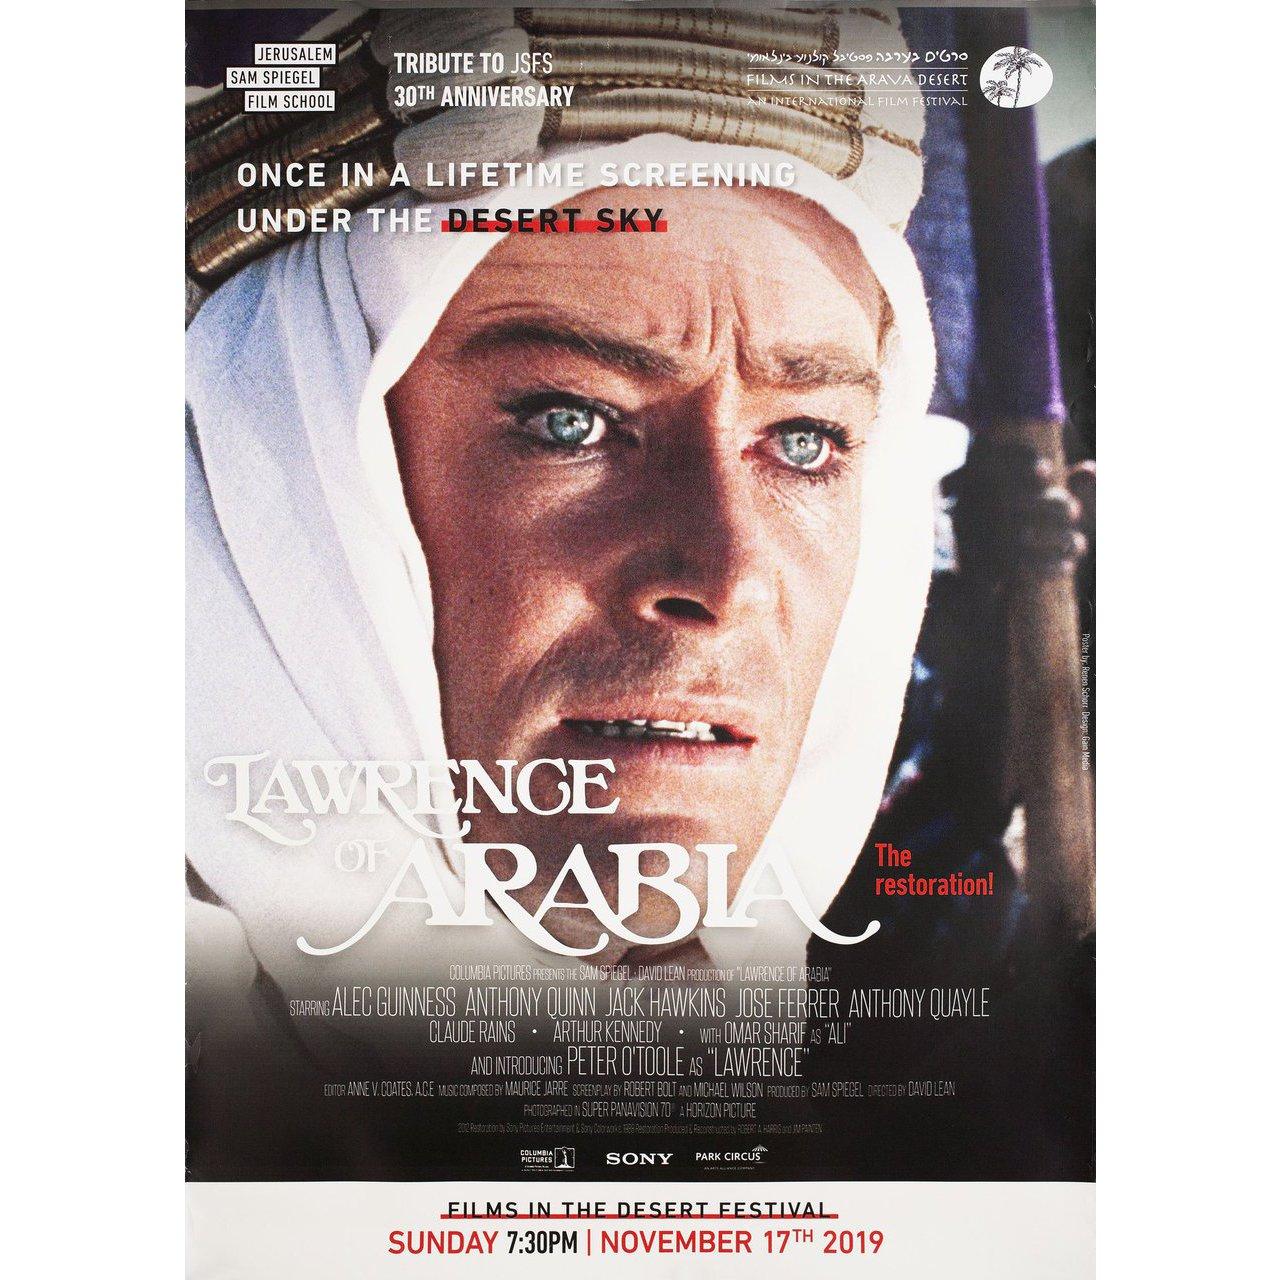 Original 2019 re-release Israeli one sheet poster for the 1962 film 'Lawrence of Arabia' directed by David Lean with Peter O'Toole / Alec Guinness / Anthony Quinn / Jack Hawkins. Very good-fine condition, rolled. Please note: the size is stated in